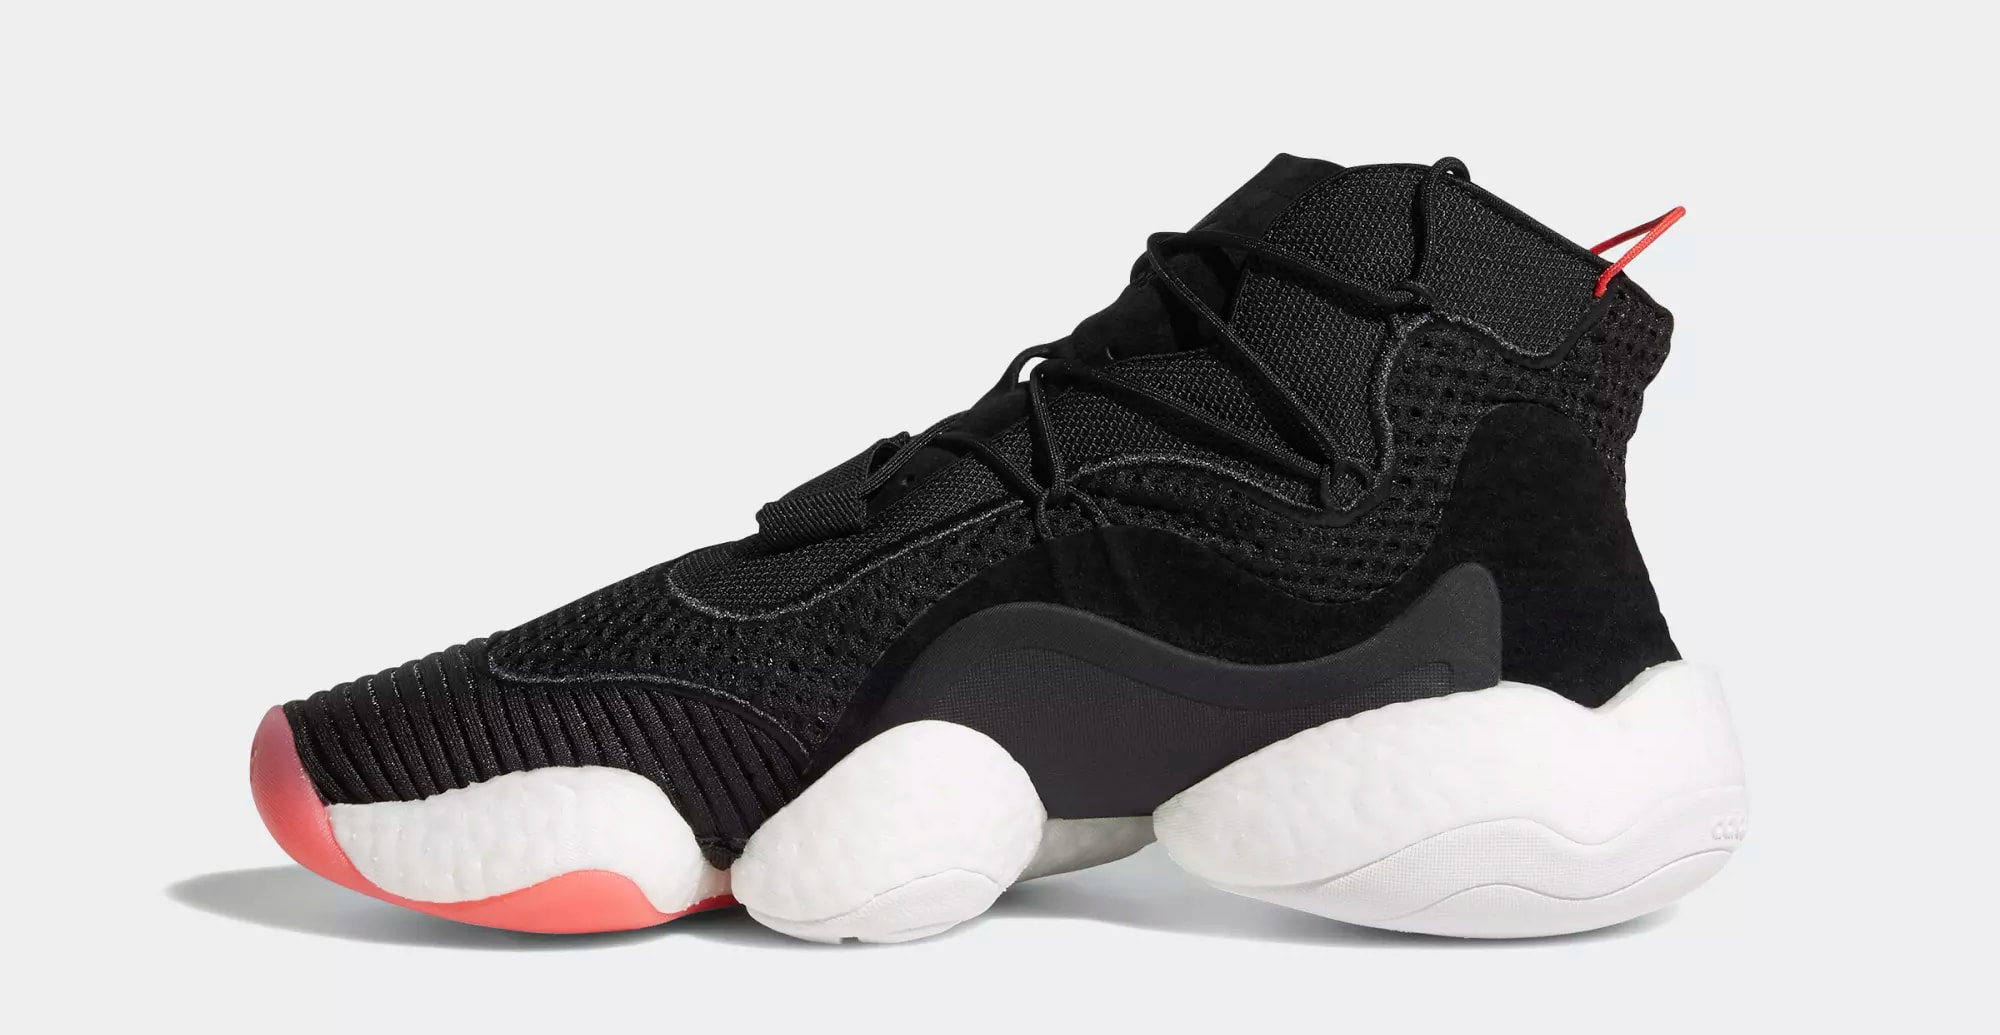 Adidas Crazy BYW &#x27;Core Black/Cloud White/Bright Red&#x27; B37480 (Medial)